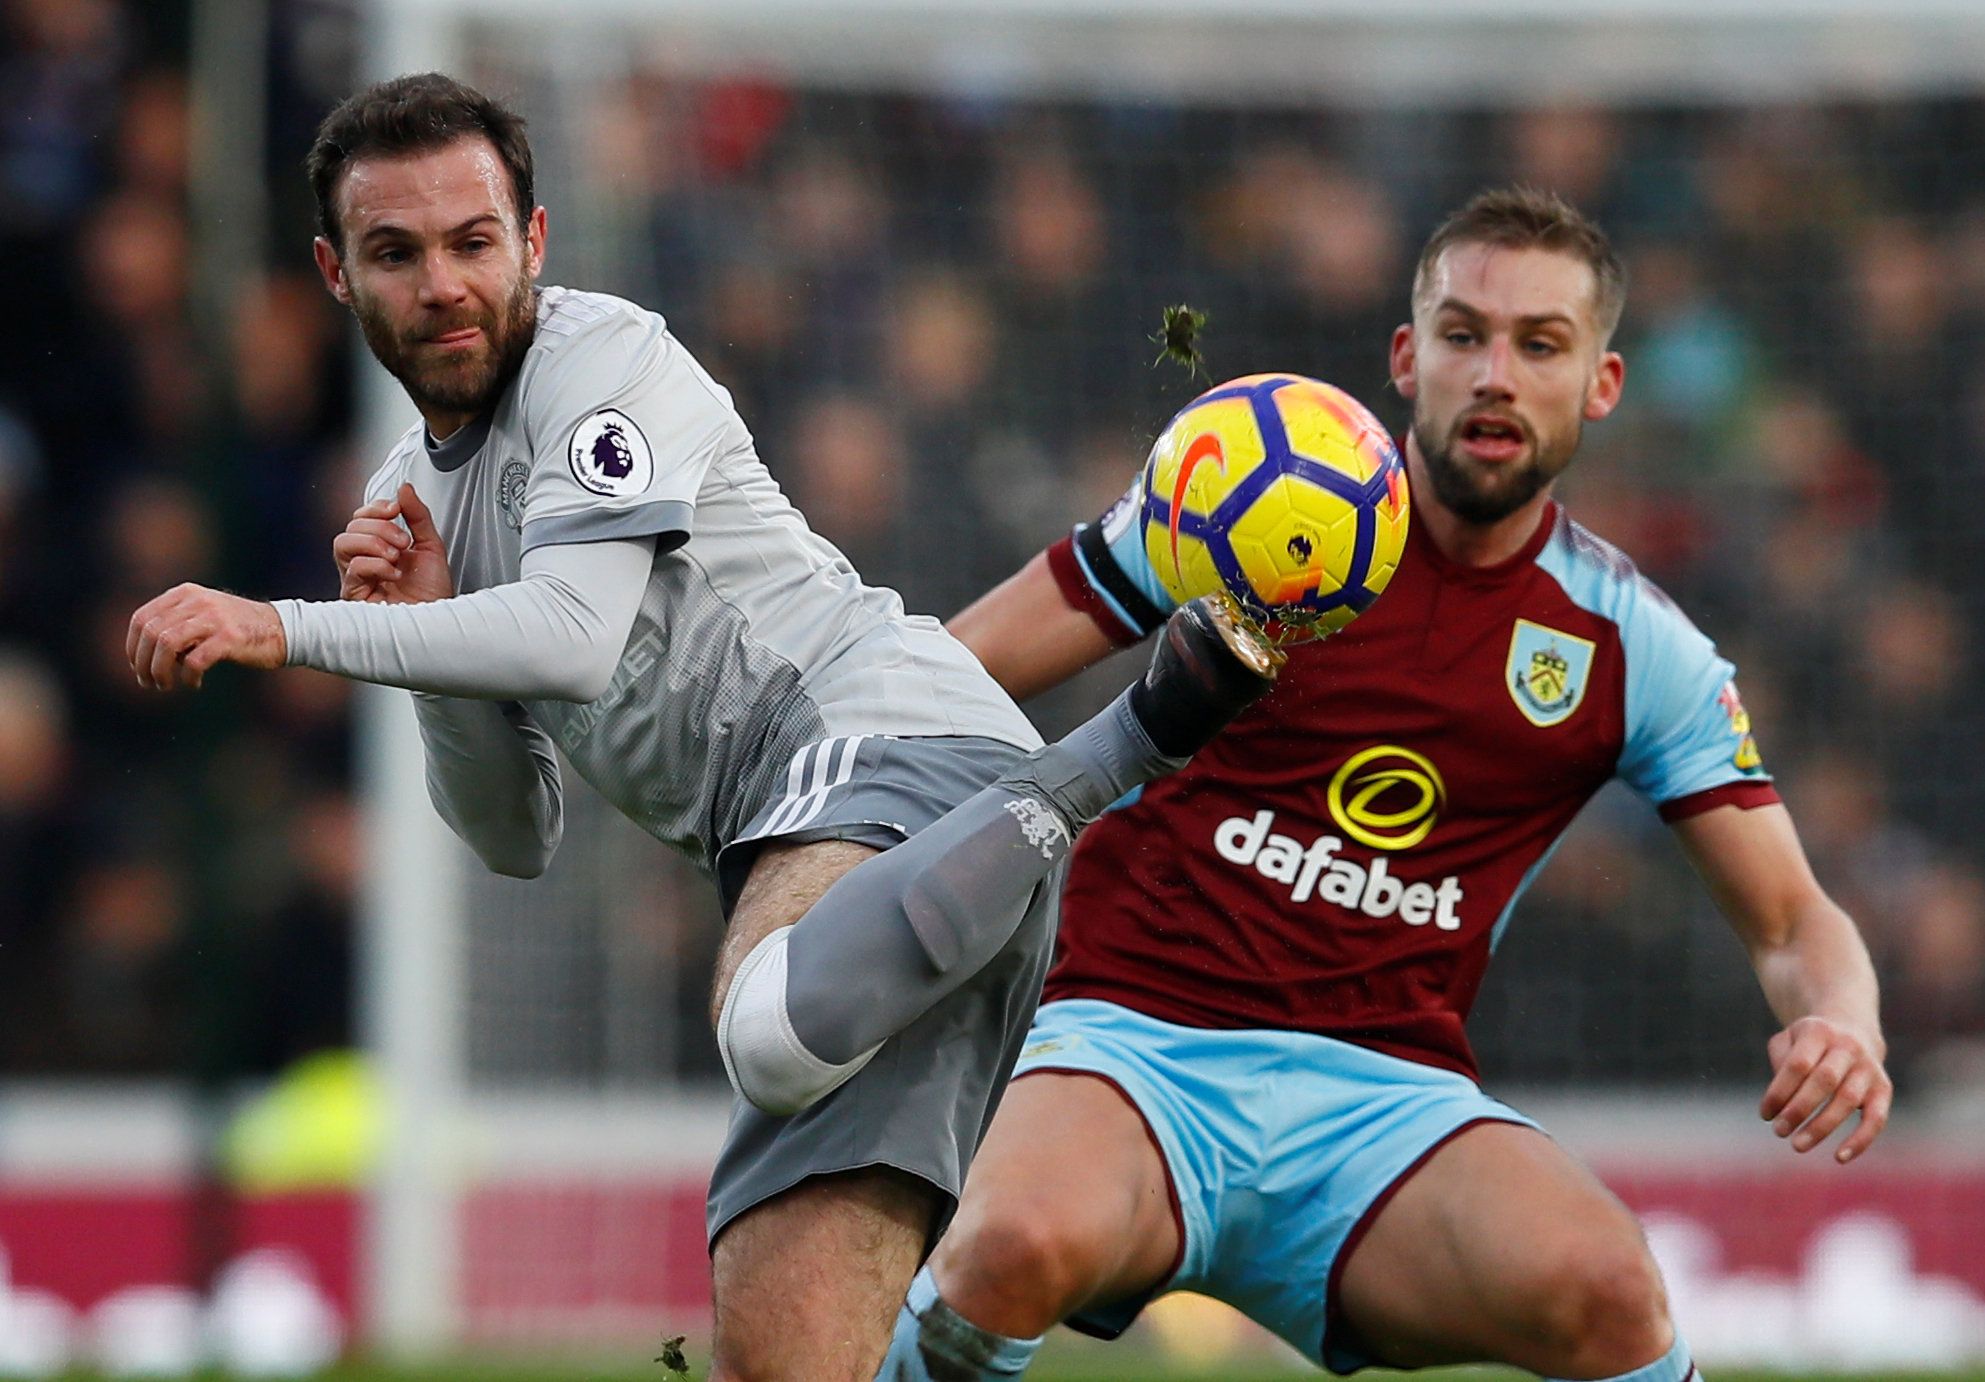 Soccer Football - Premier League - Burnley vs Manchester United - Turf Moor, Burnley, Britain - January 20, 2018   Manchester United's Juan Mata in action with Burnley's Charlie Taylor    Action Images via Reuters/Jason Cairnduff    EDITORIAL USE ONLY. No use with unauthorized audio, video, data, fixture lists, club/league logos or 